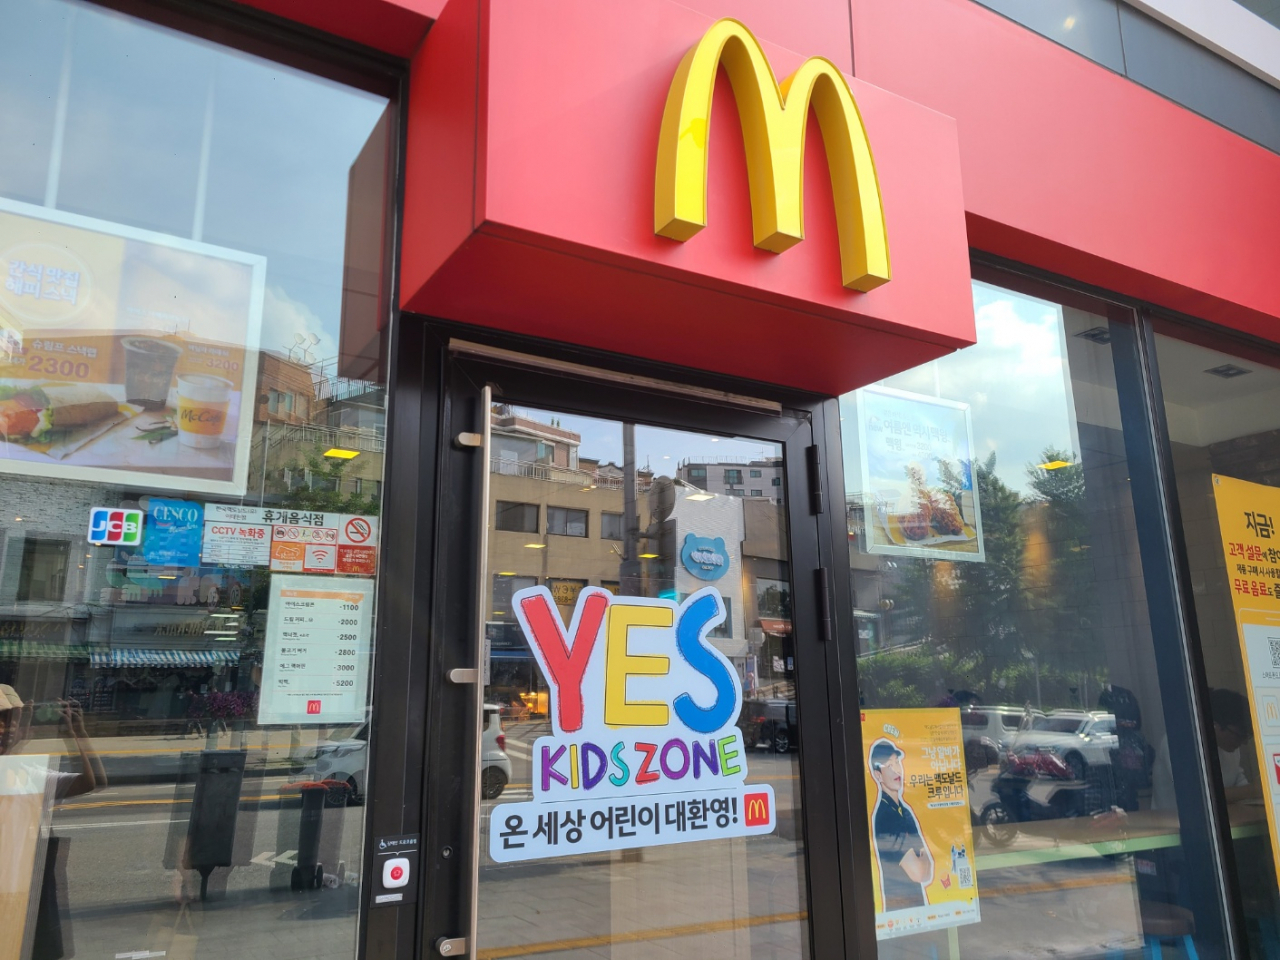 A McDonald's restaurant in Seoul displays a sign that says 